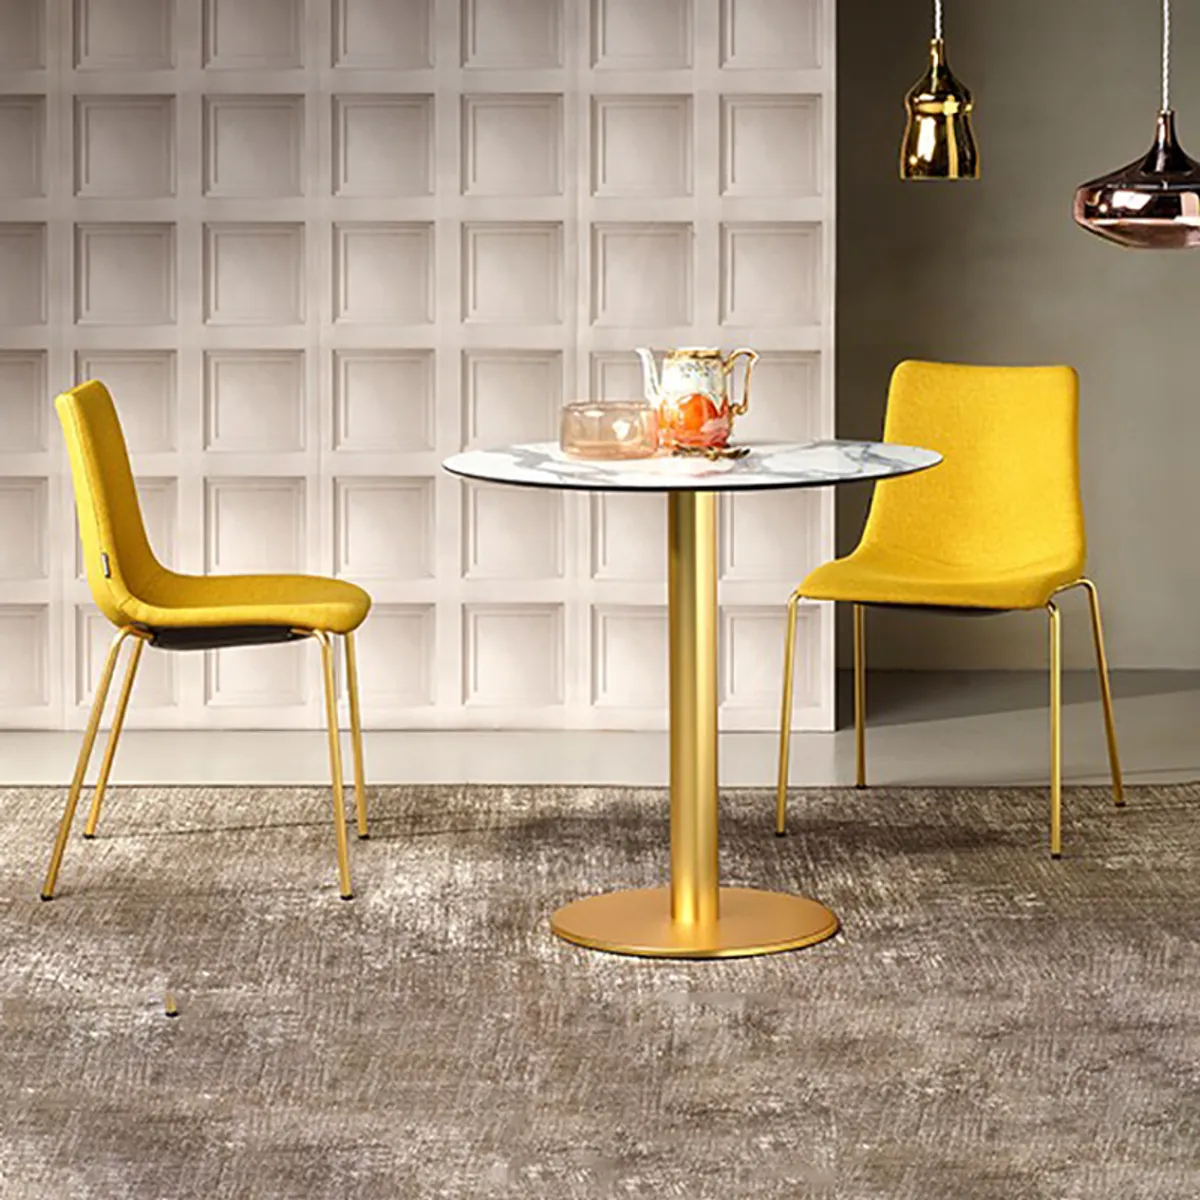 Selina Side Chair With Metal Legs And Yellow Upholstery With Column Based Table Furnishing Cafes With Insideoutcontracts